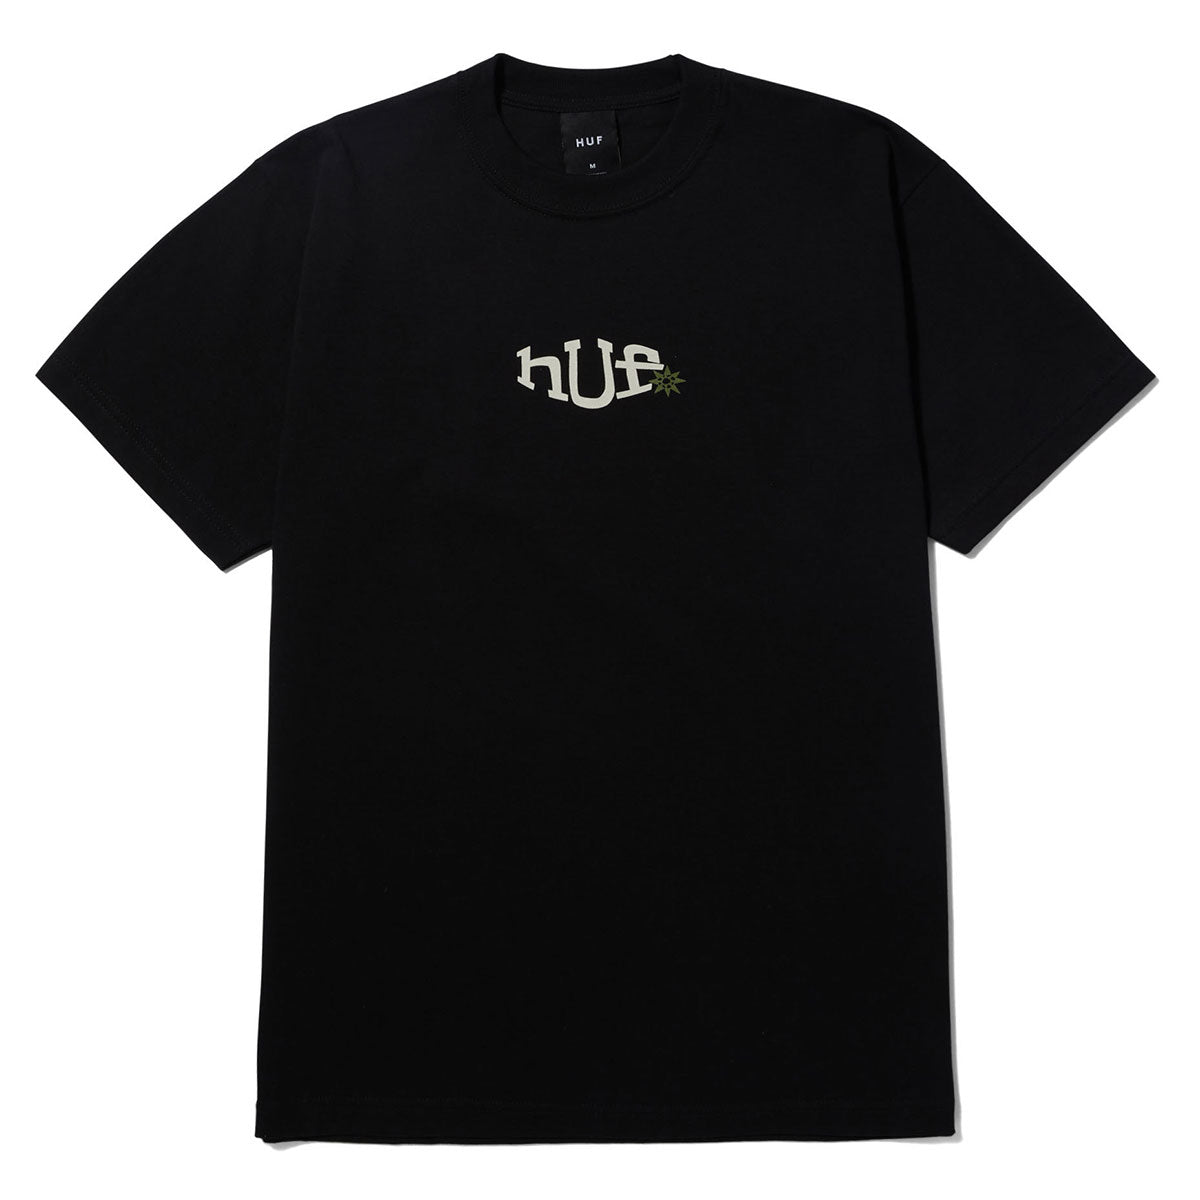 HUF Jazzy Grooves T-Shirt - Black image 2